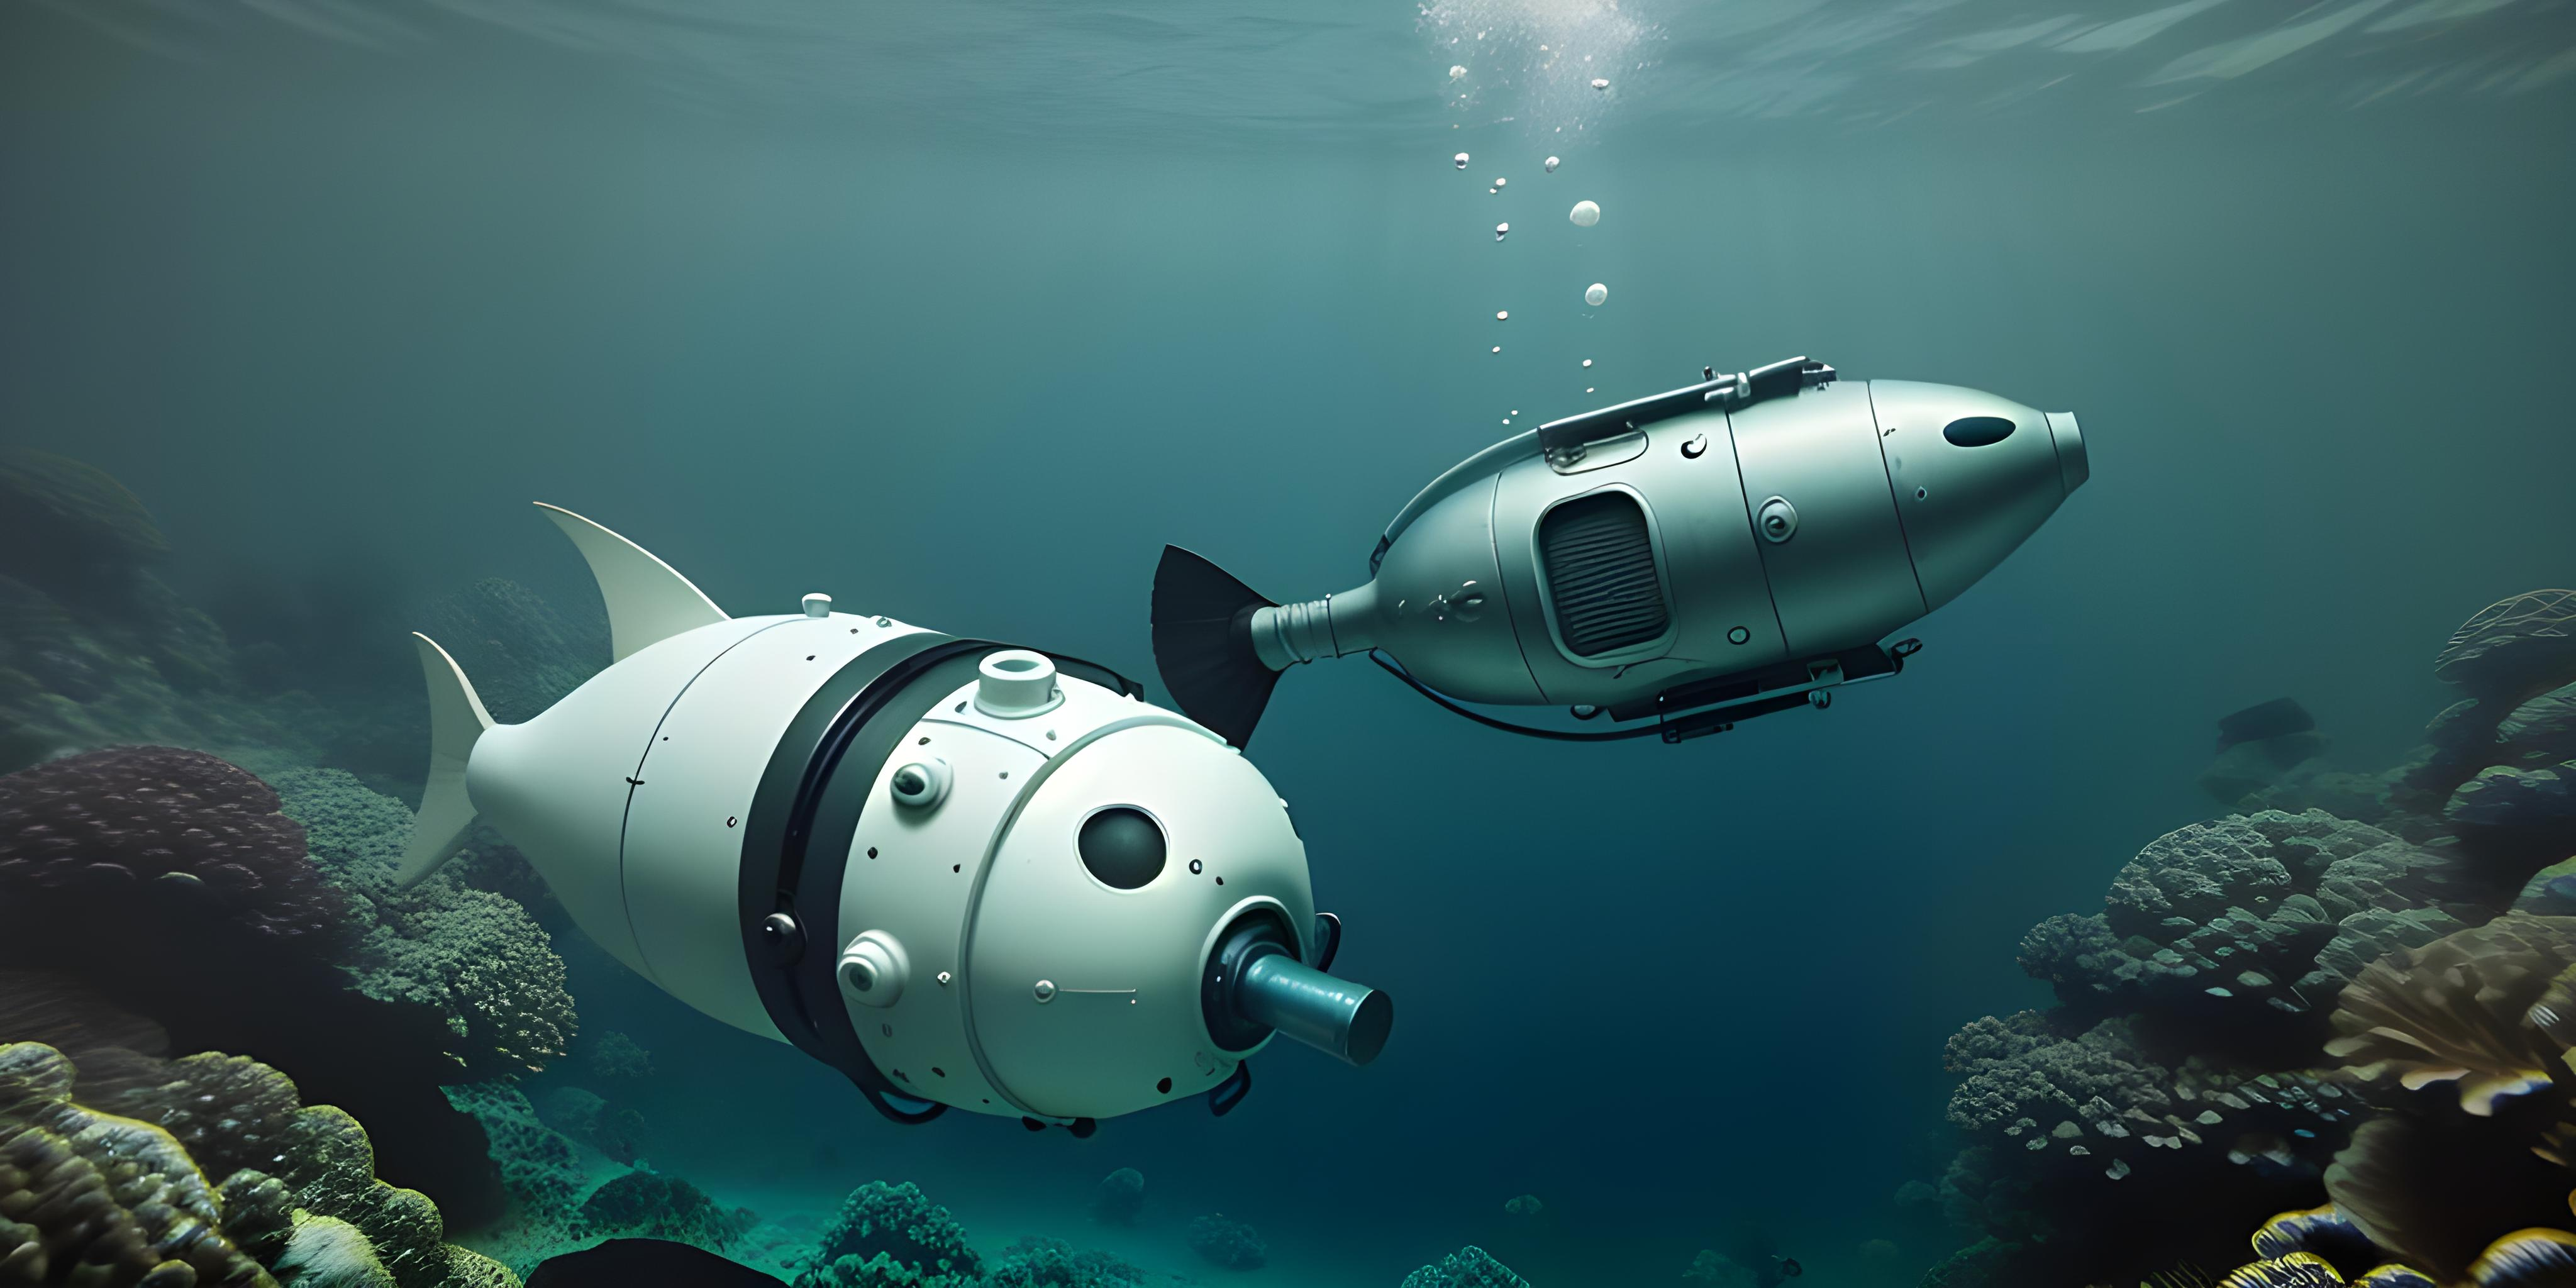 two fish-like submersibles exploring a coral reef